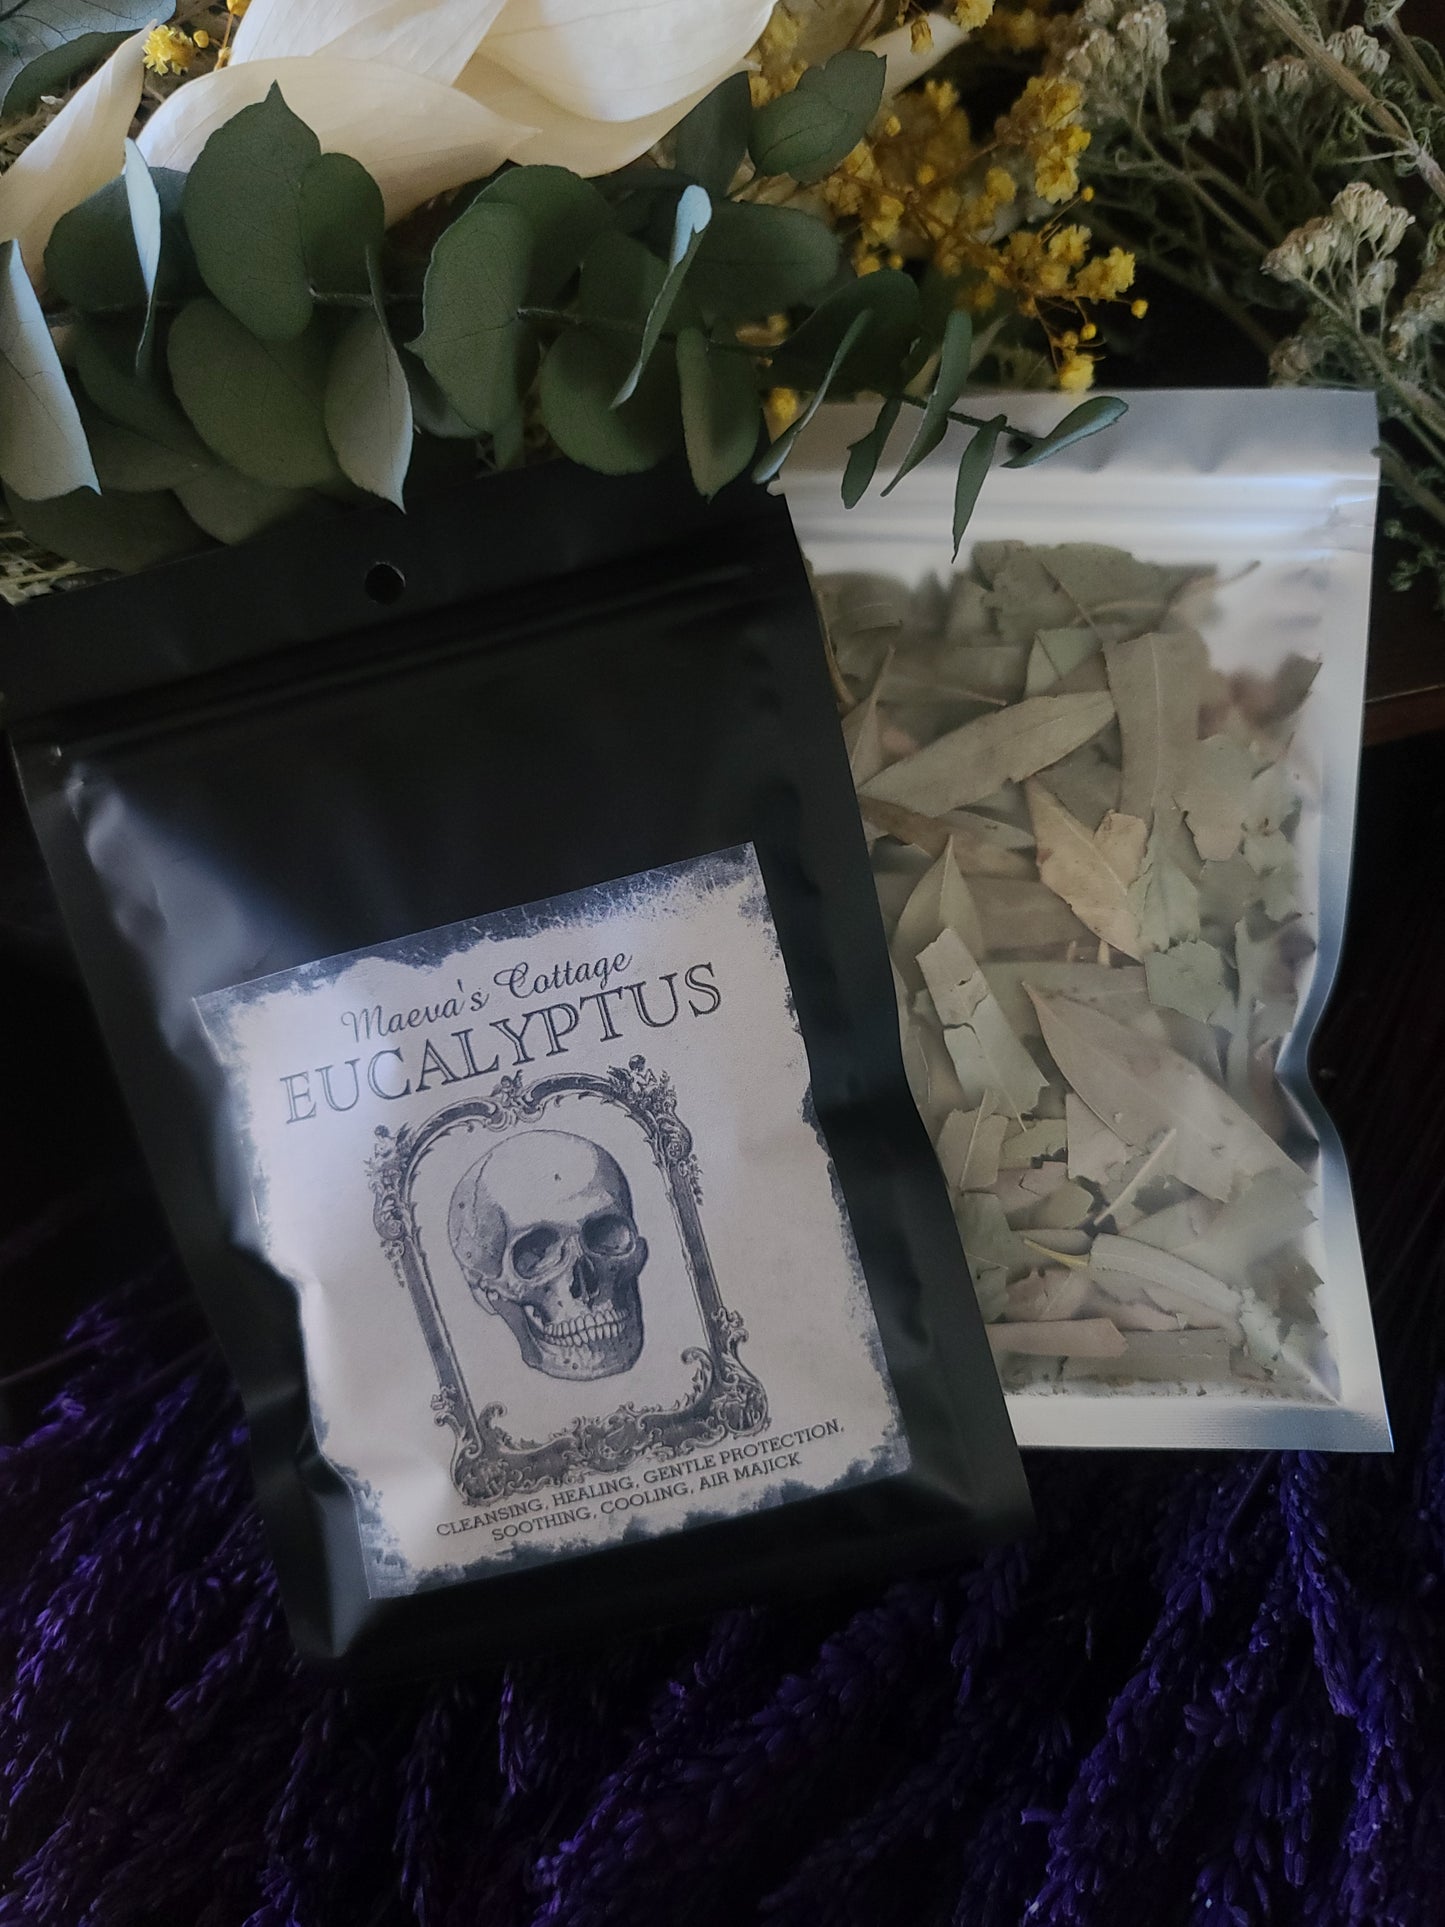 Eucalyptus for healing, gentle protection, cleansing, calming